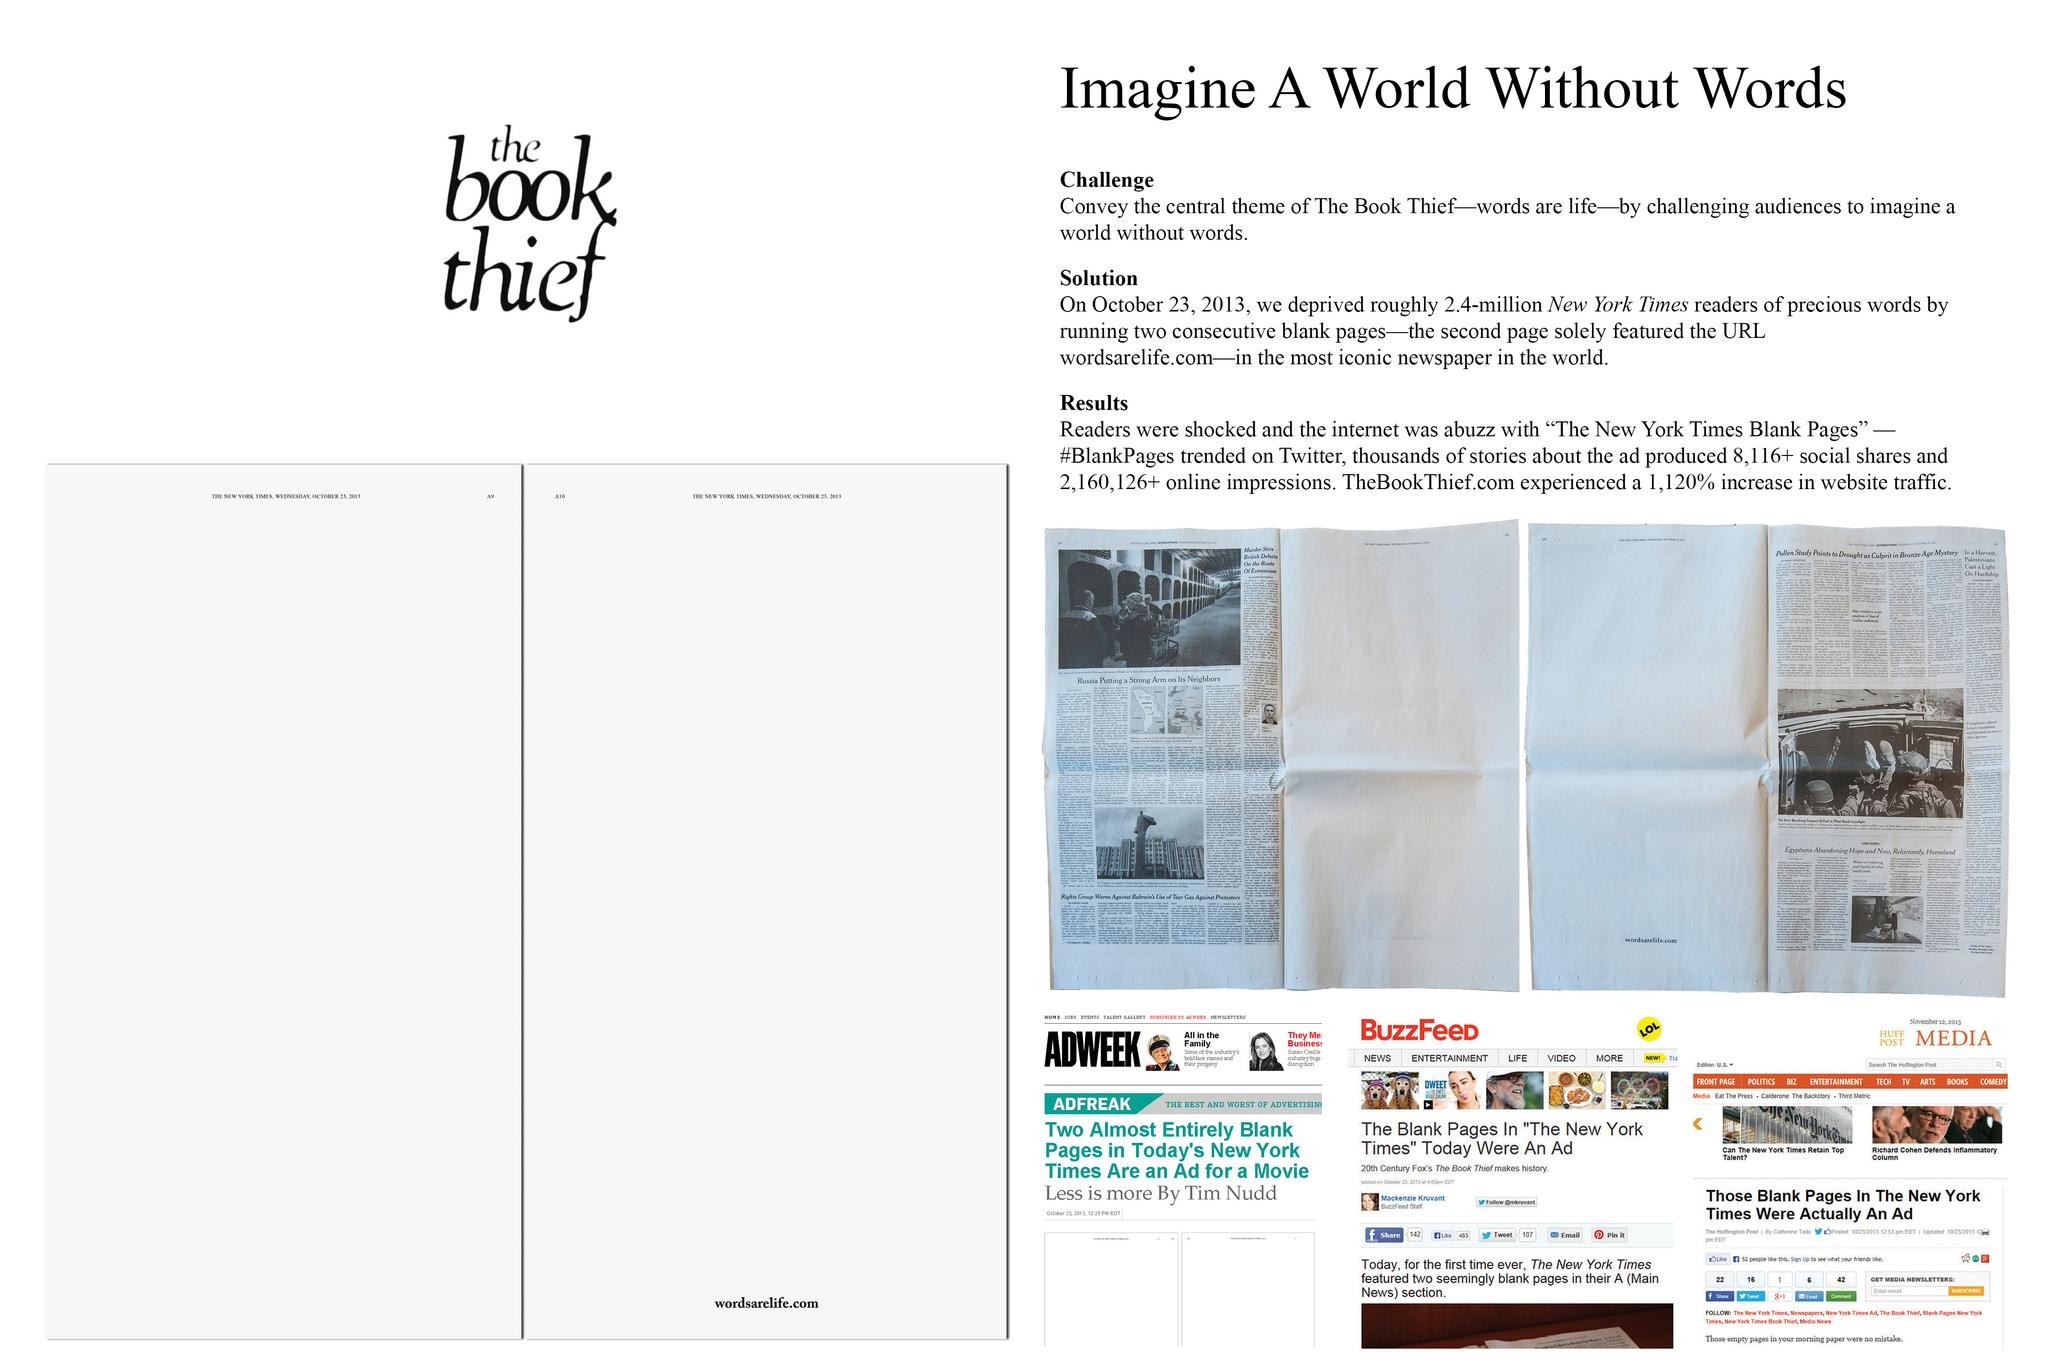 THE BOOK THIEF: IMAGINE A WORLD WITHOUT WORDS